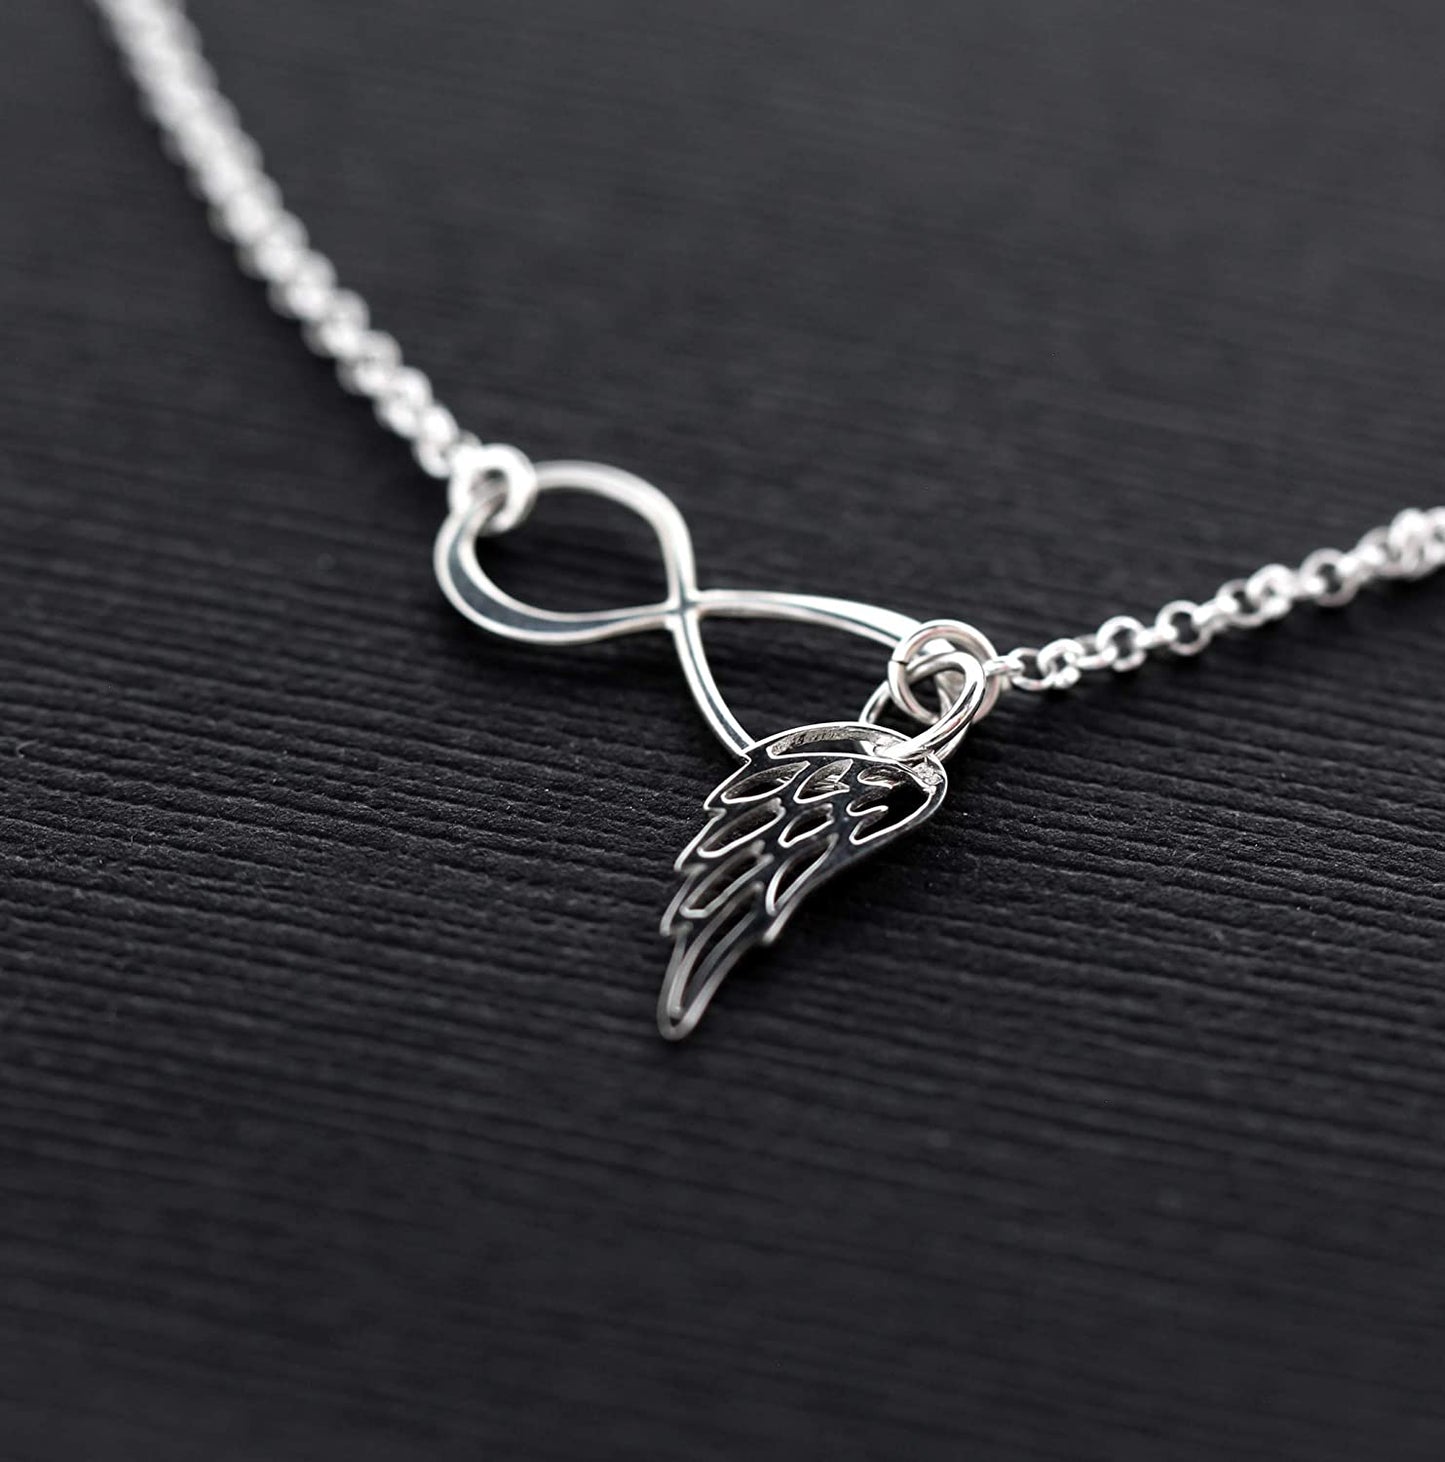 Memorial Gift Jewelry • Sorry For Your Loss Necklace • Sterling Silver • Angel Wing Infinity • In Memory of Husband Mother Father Sister Child Baby Pet Dog Miscarriage • Sympathy Remembrance Gift